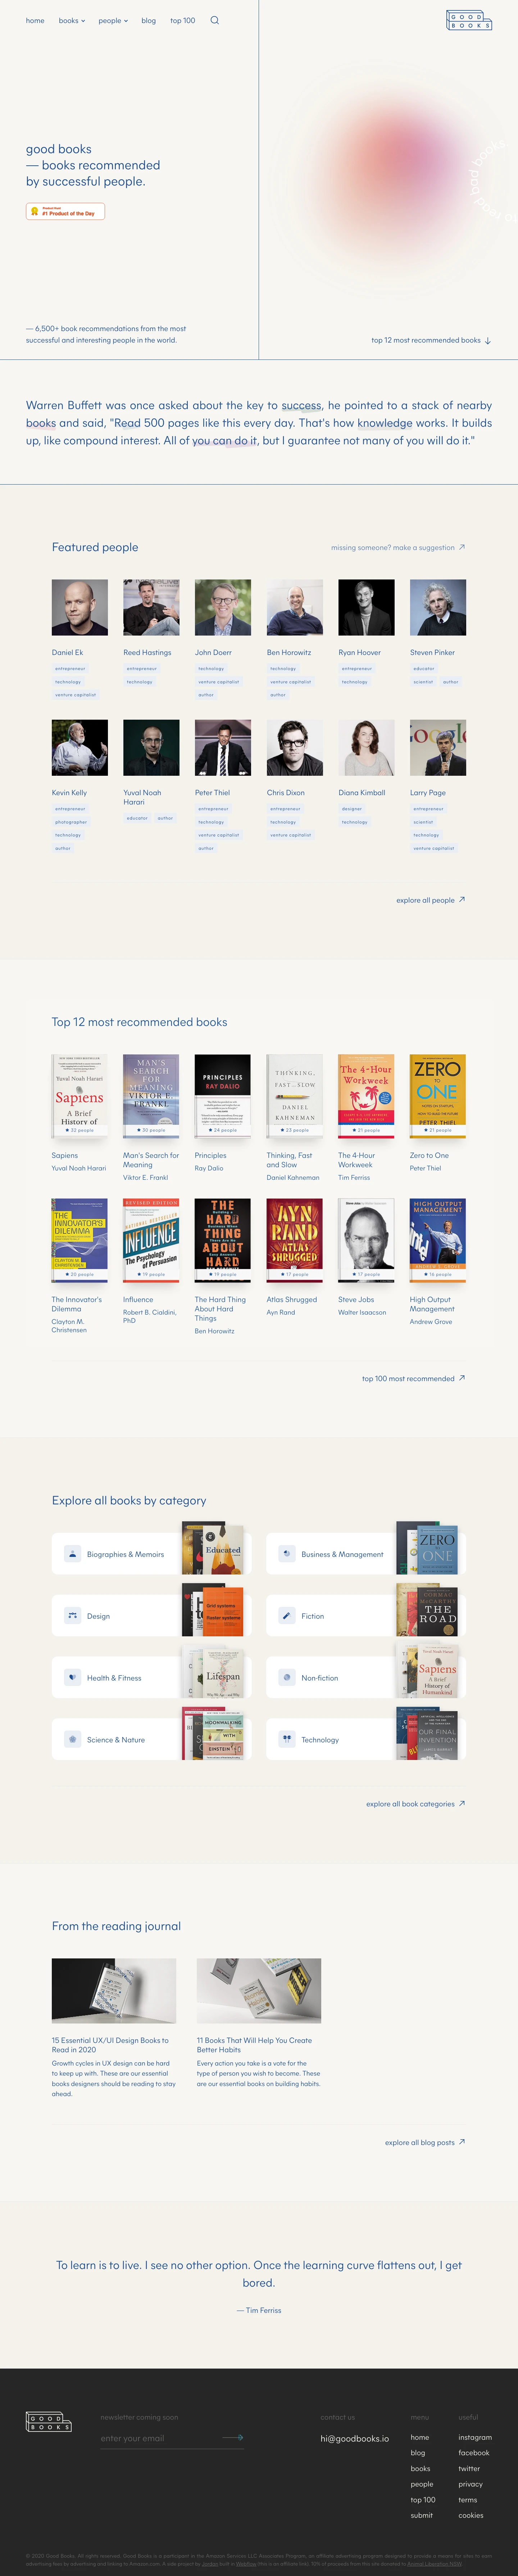 Good Books Landing Page Example: Looking for the best books to read in 2020? Discover the best book recommendations from the world's most successful, influential and interesting people.